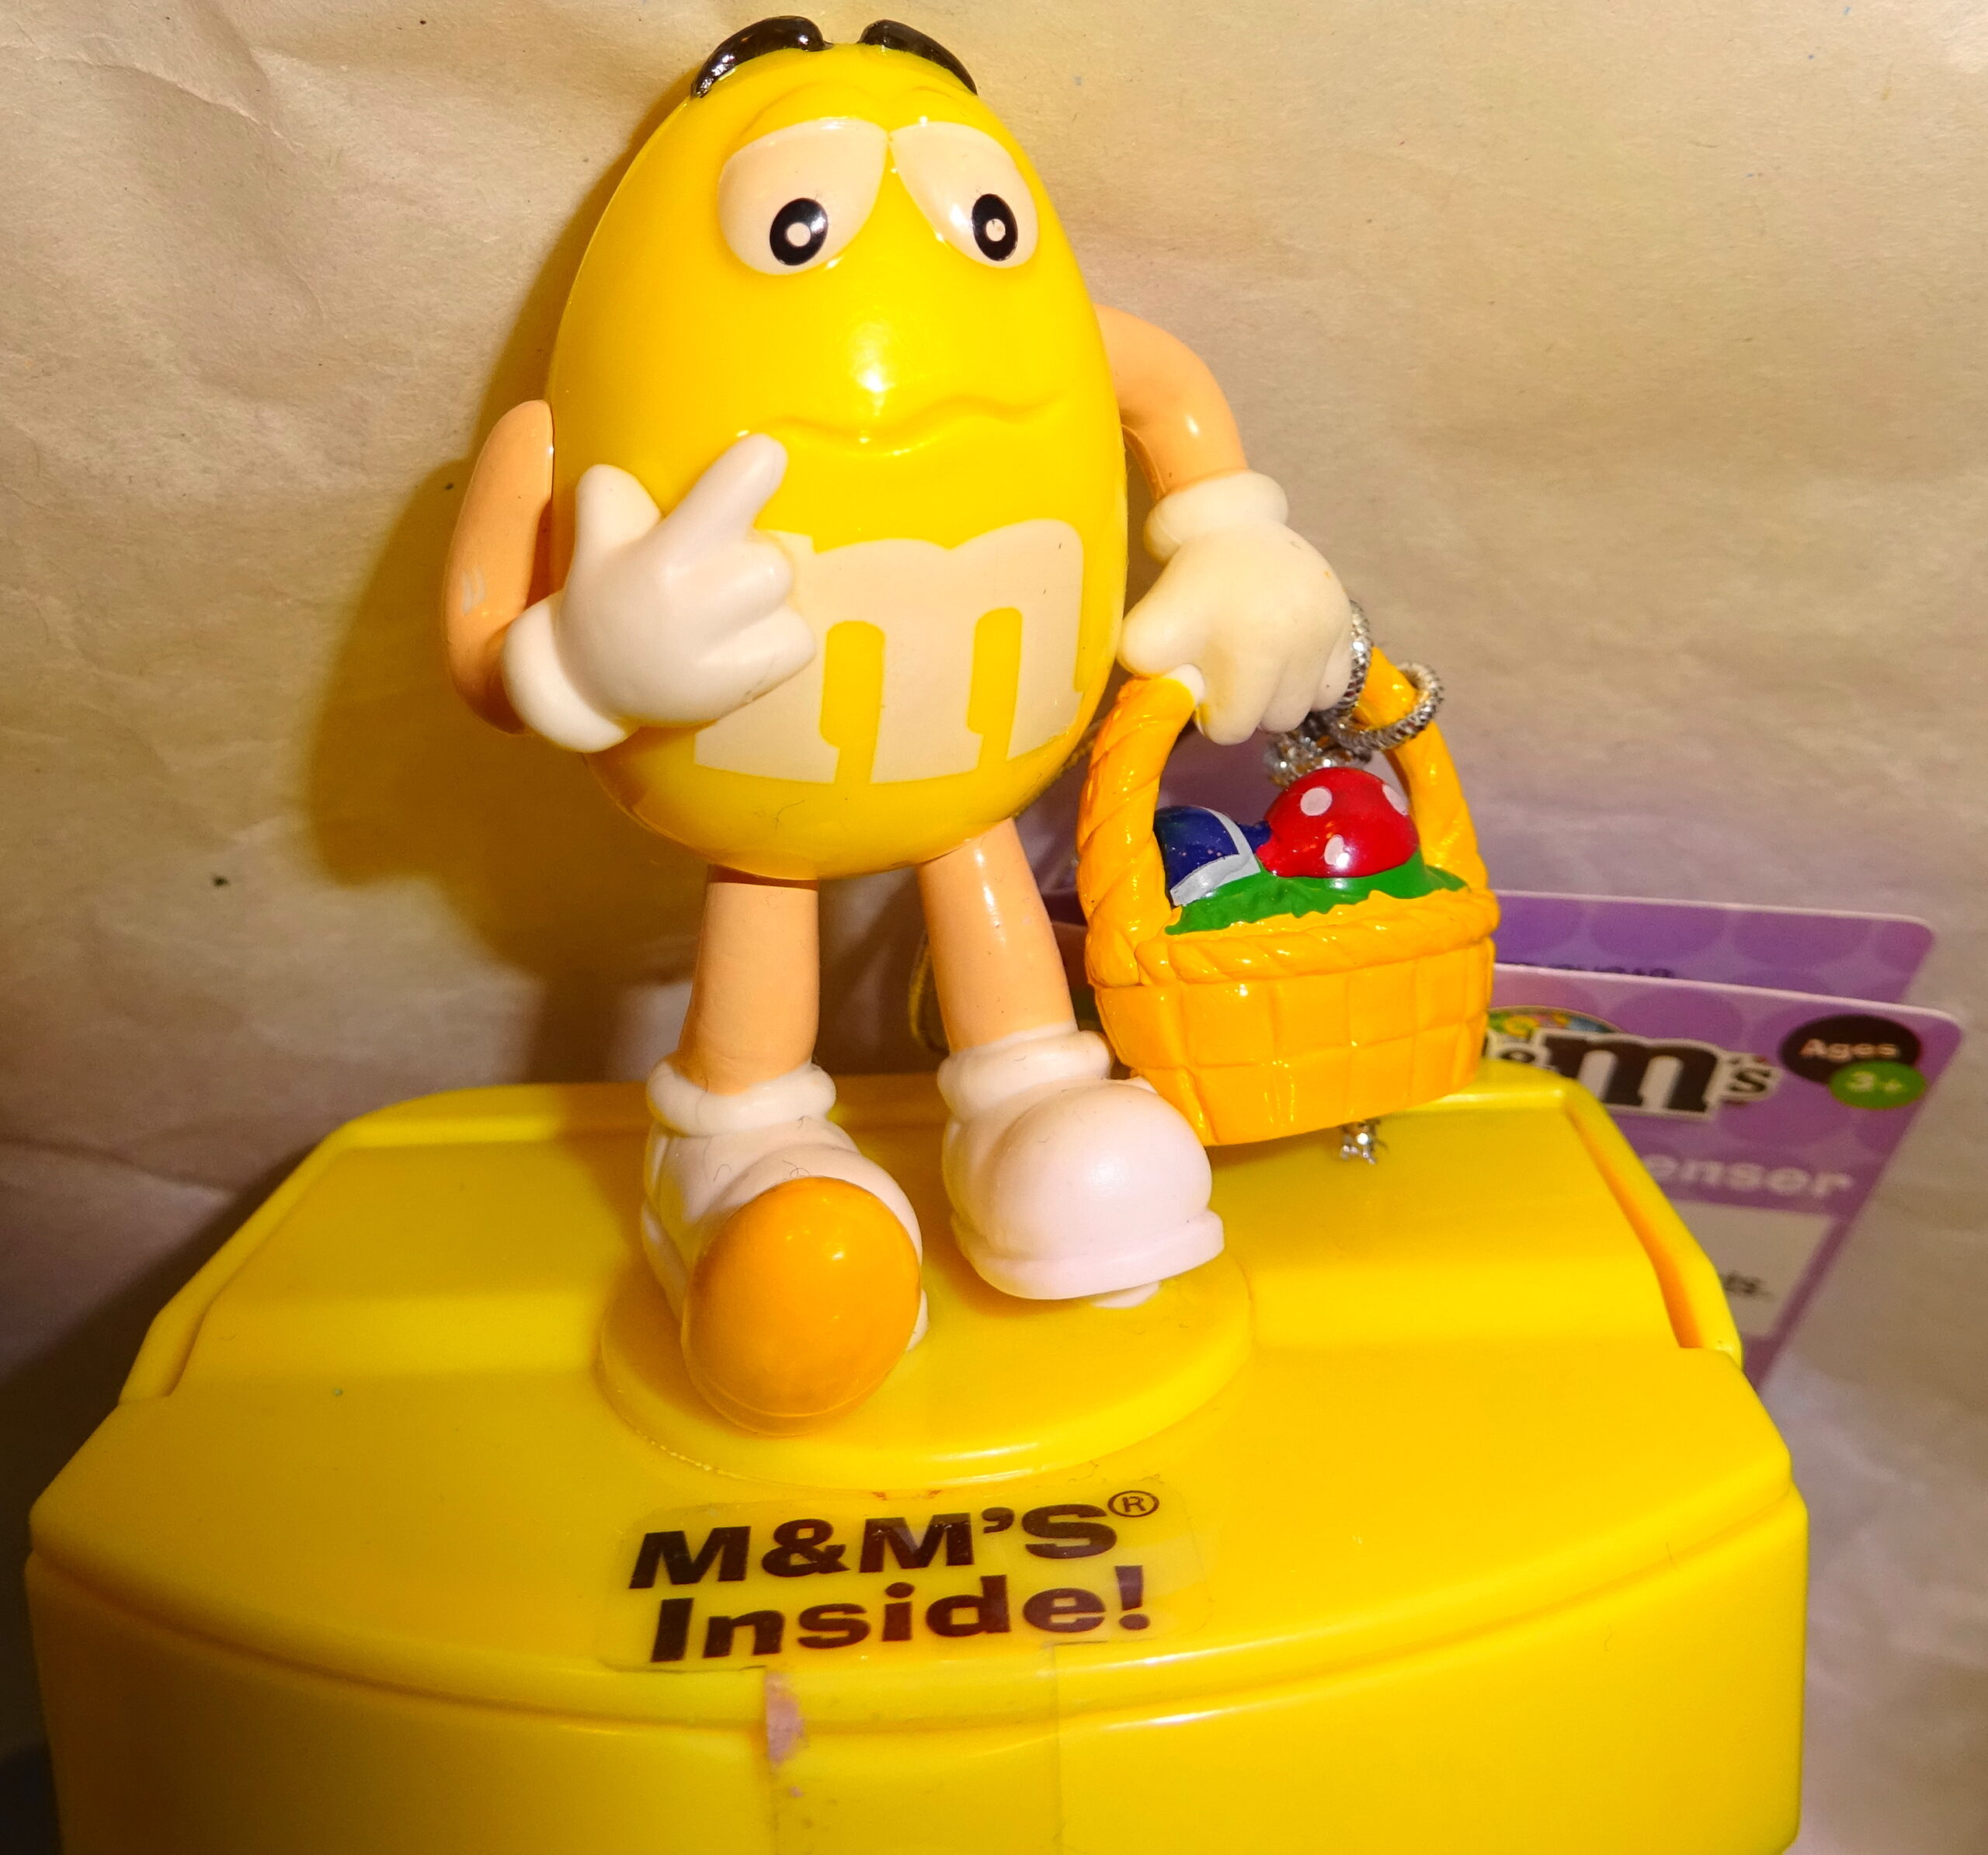 WHAT'S IN M&M's? — Ingredient Inspector